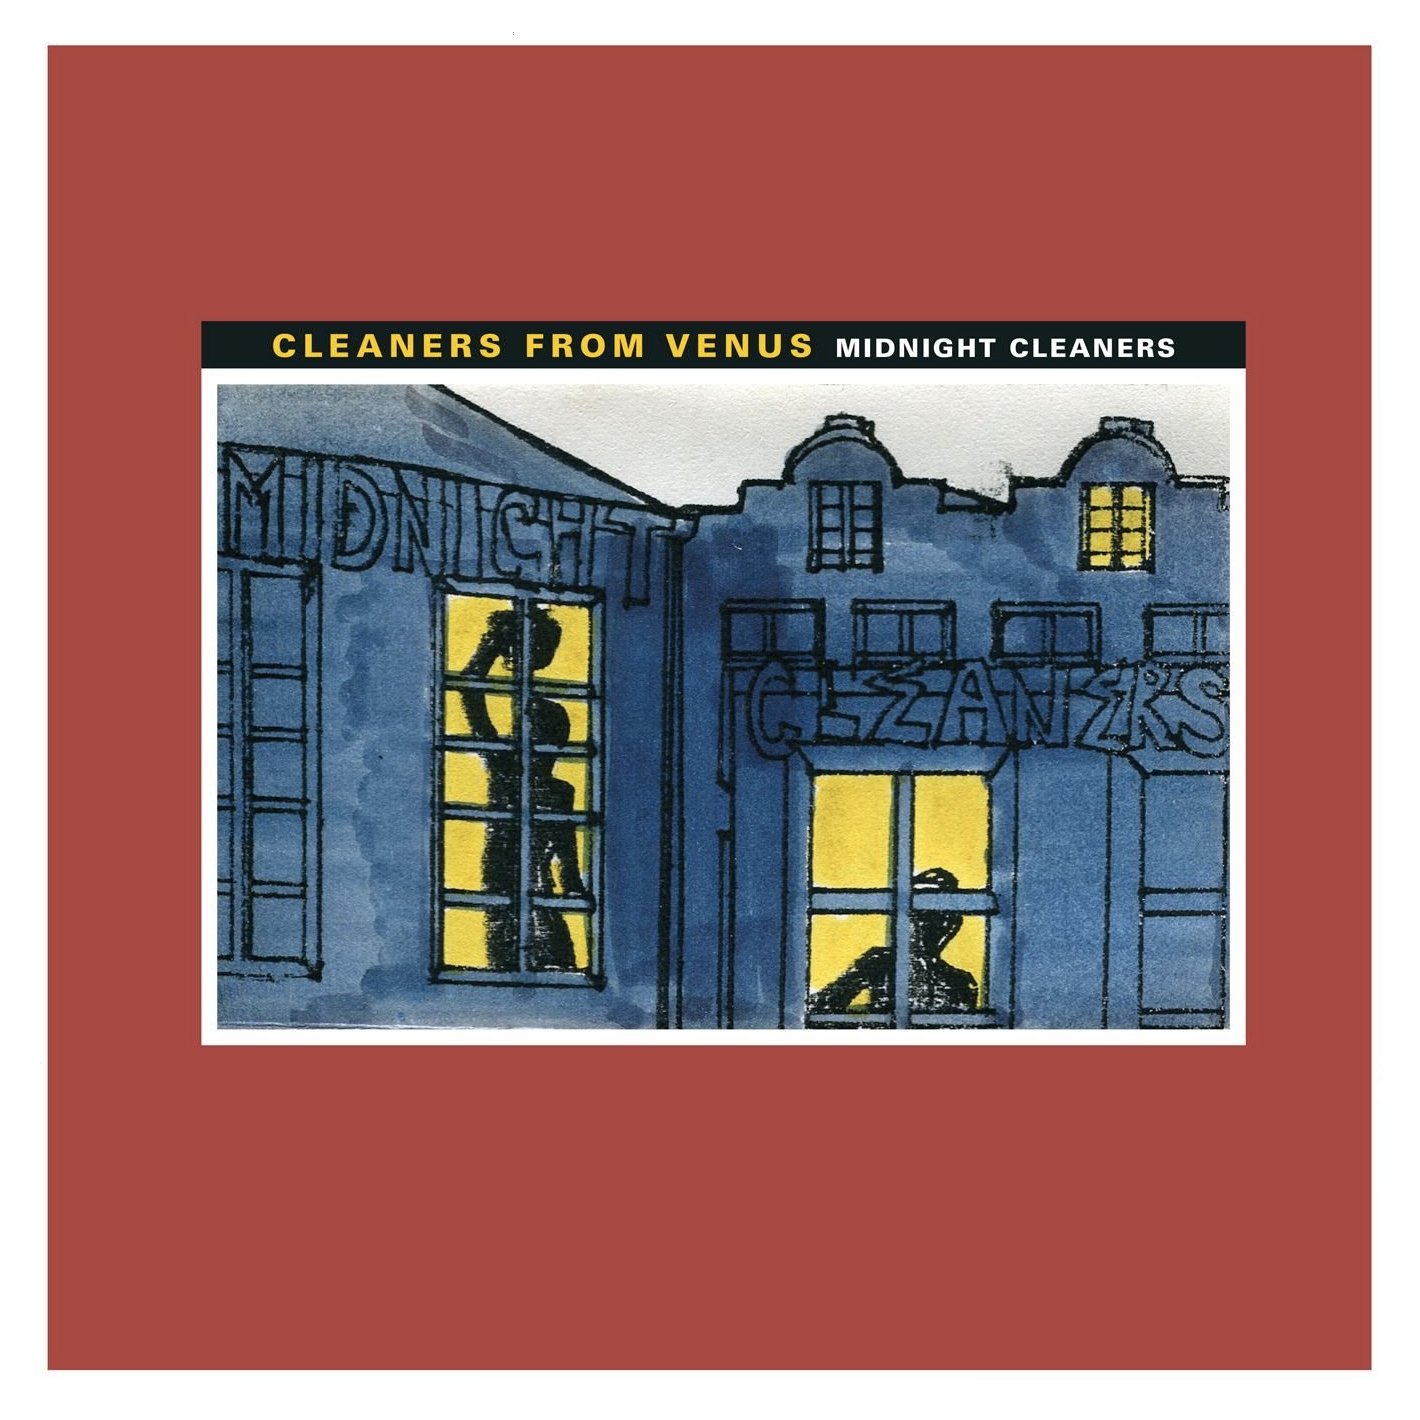 Midnight cleaners. Only a Shadow (the Cleaners from Venus Cover). Cleaner from Venus. Midnight Cleaners карта.